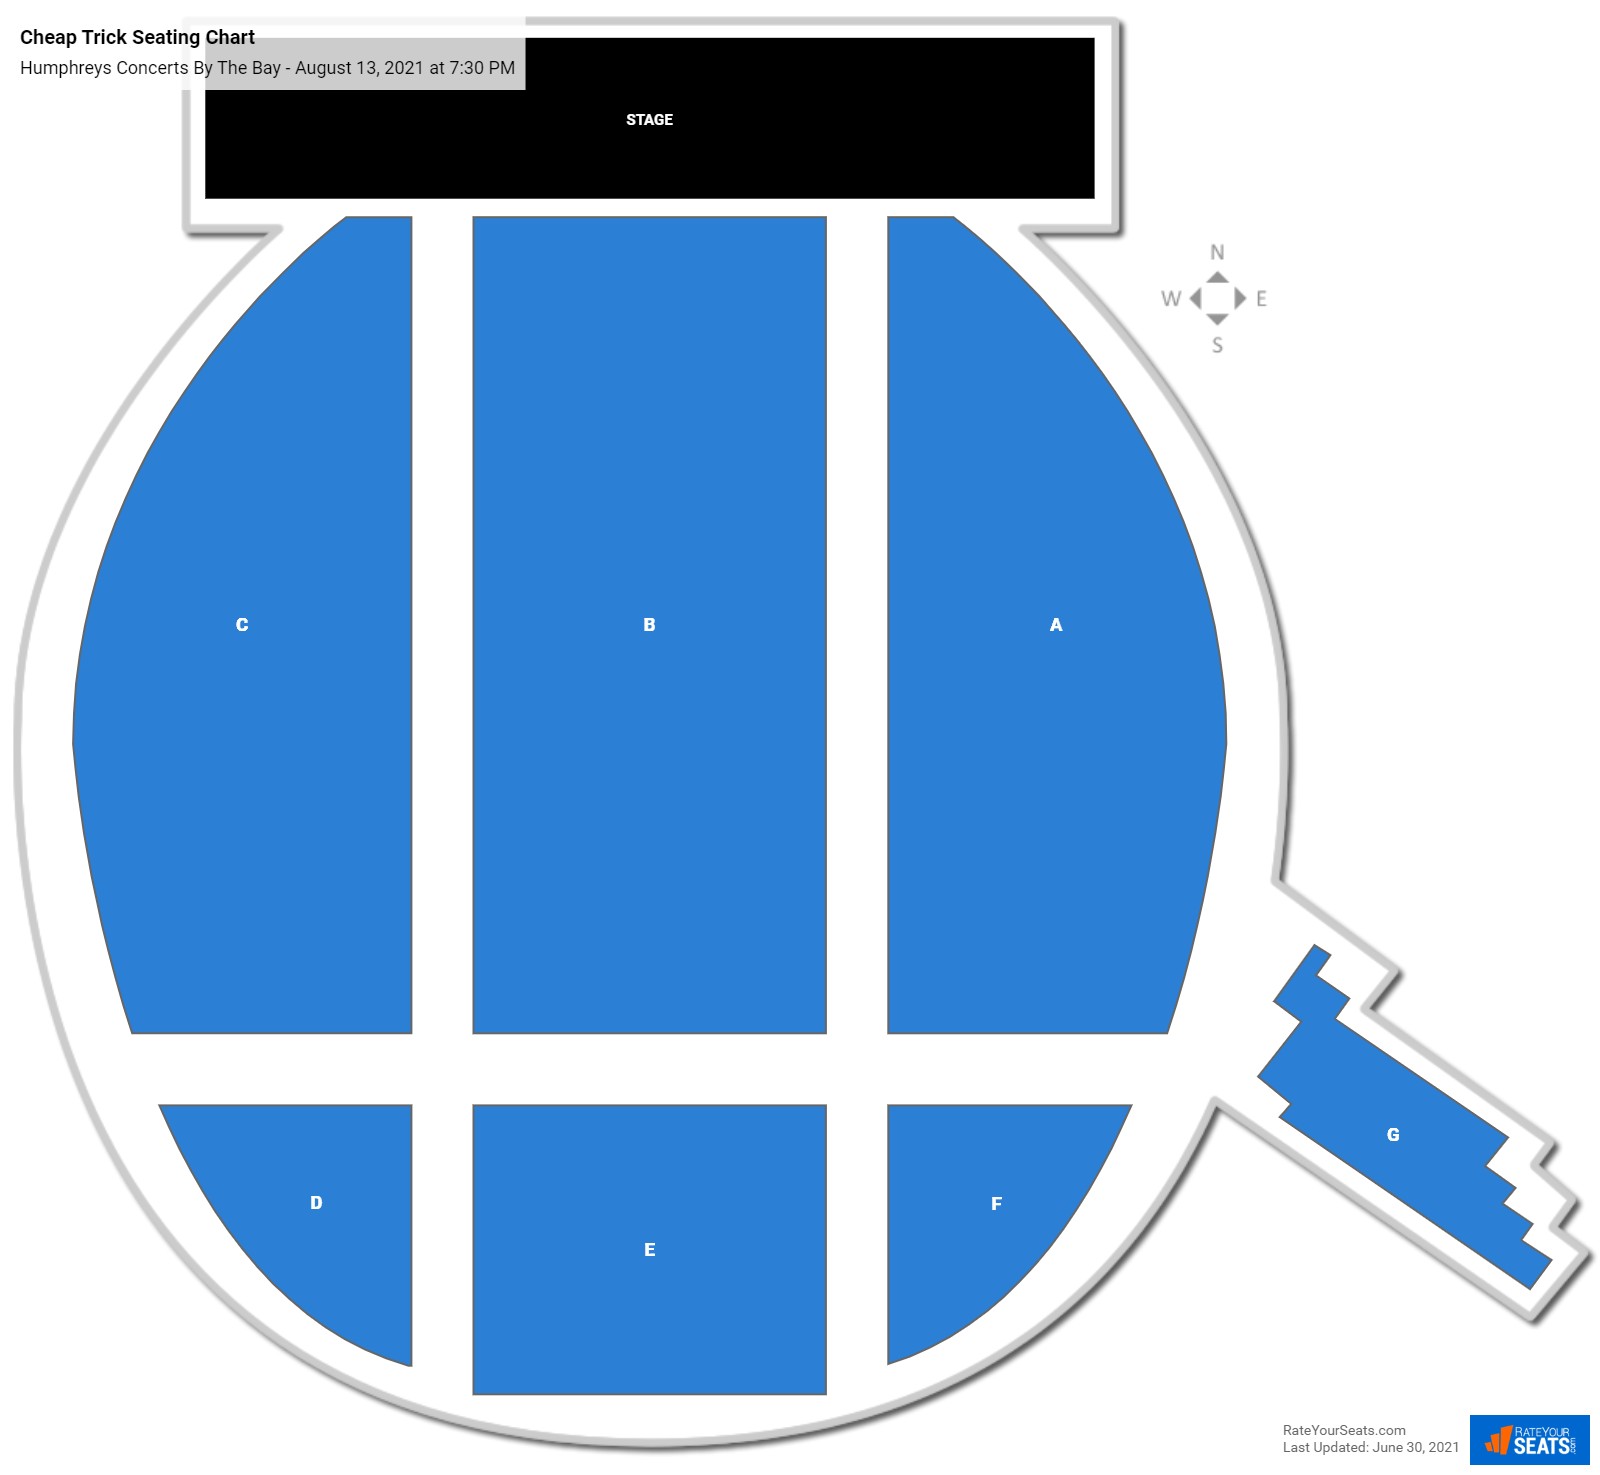 Humphreys Concerts By The Bay Seating Chart